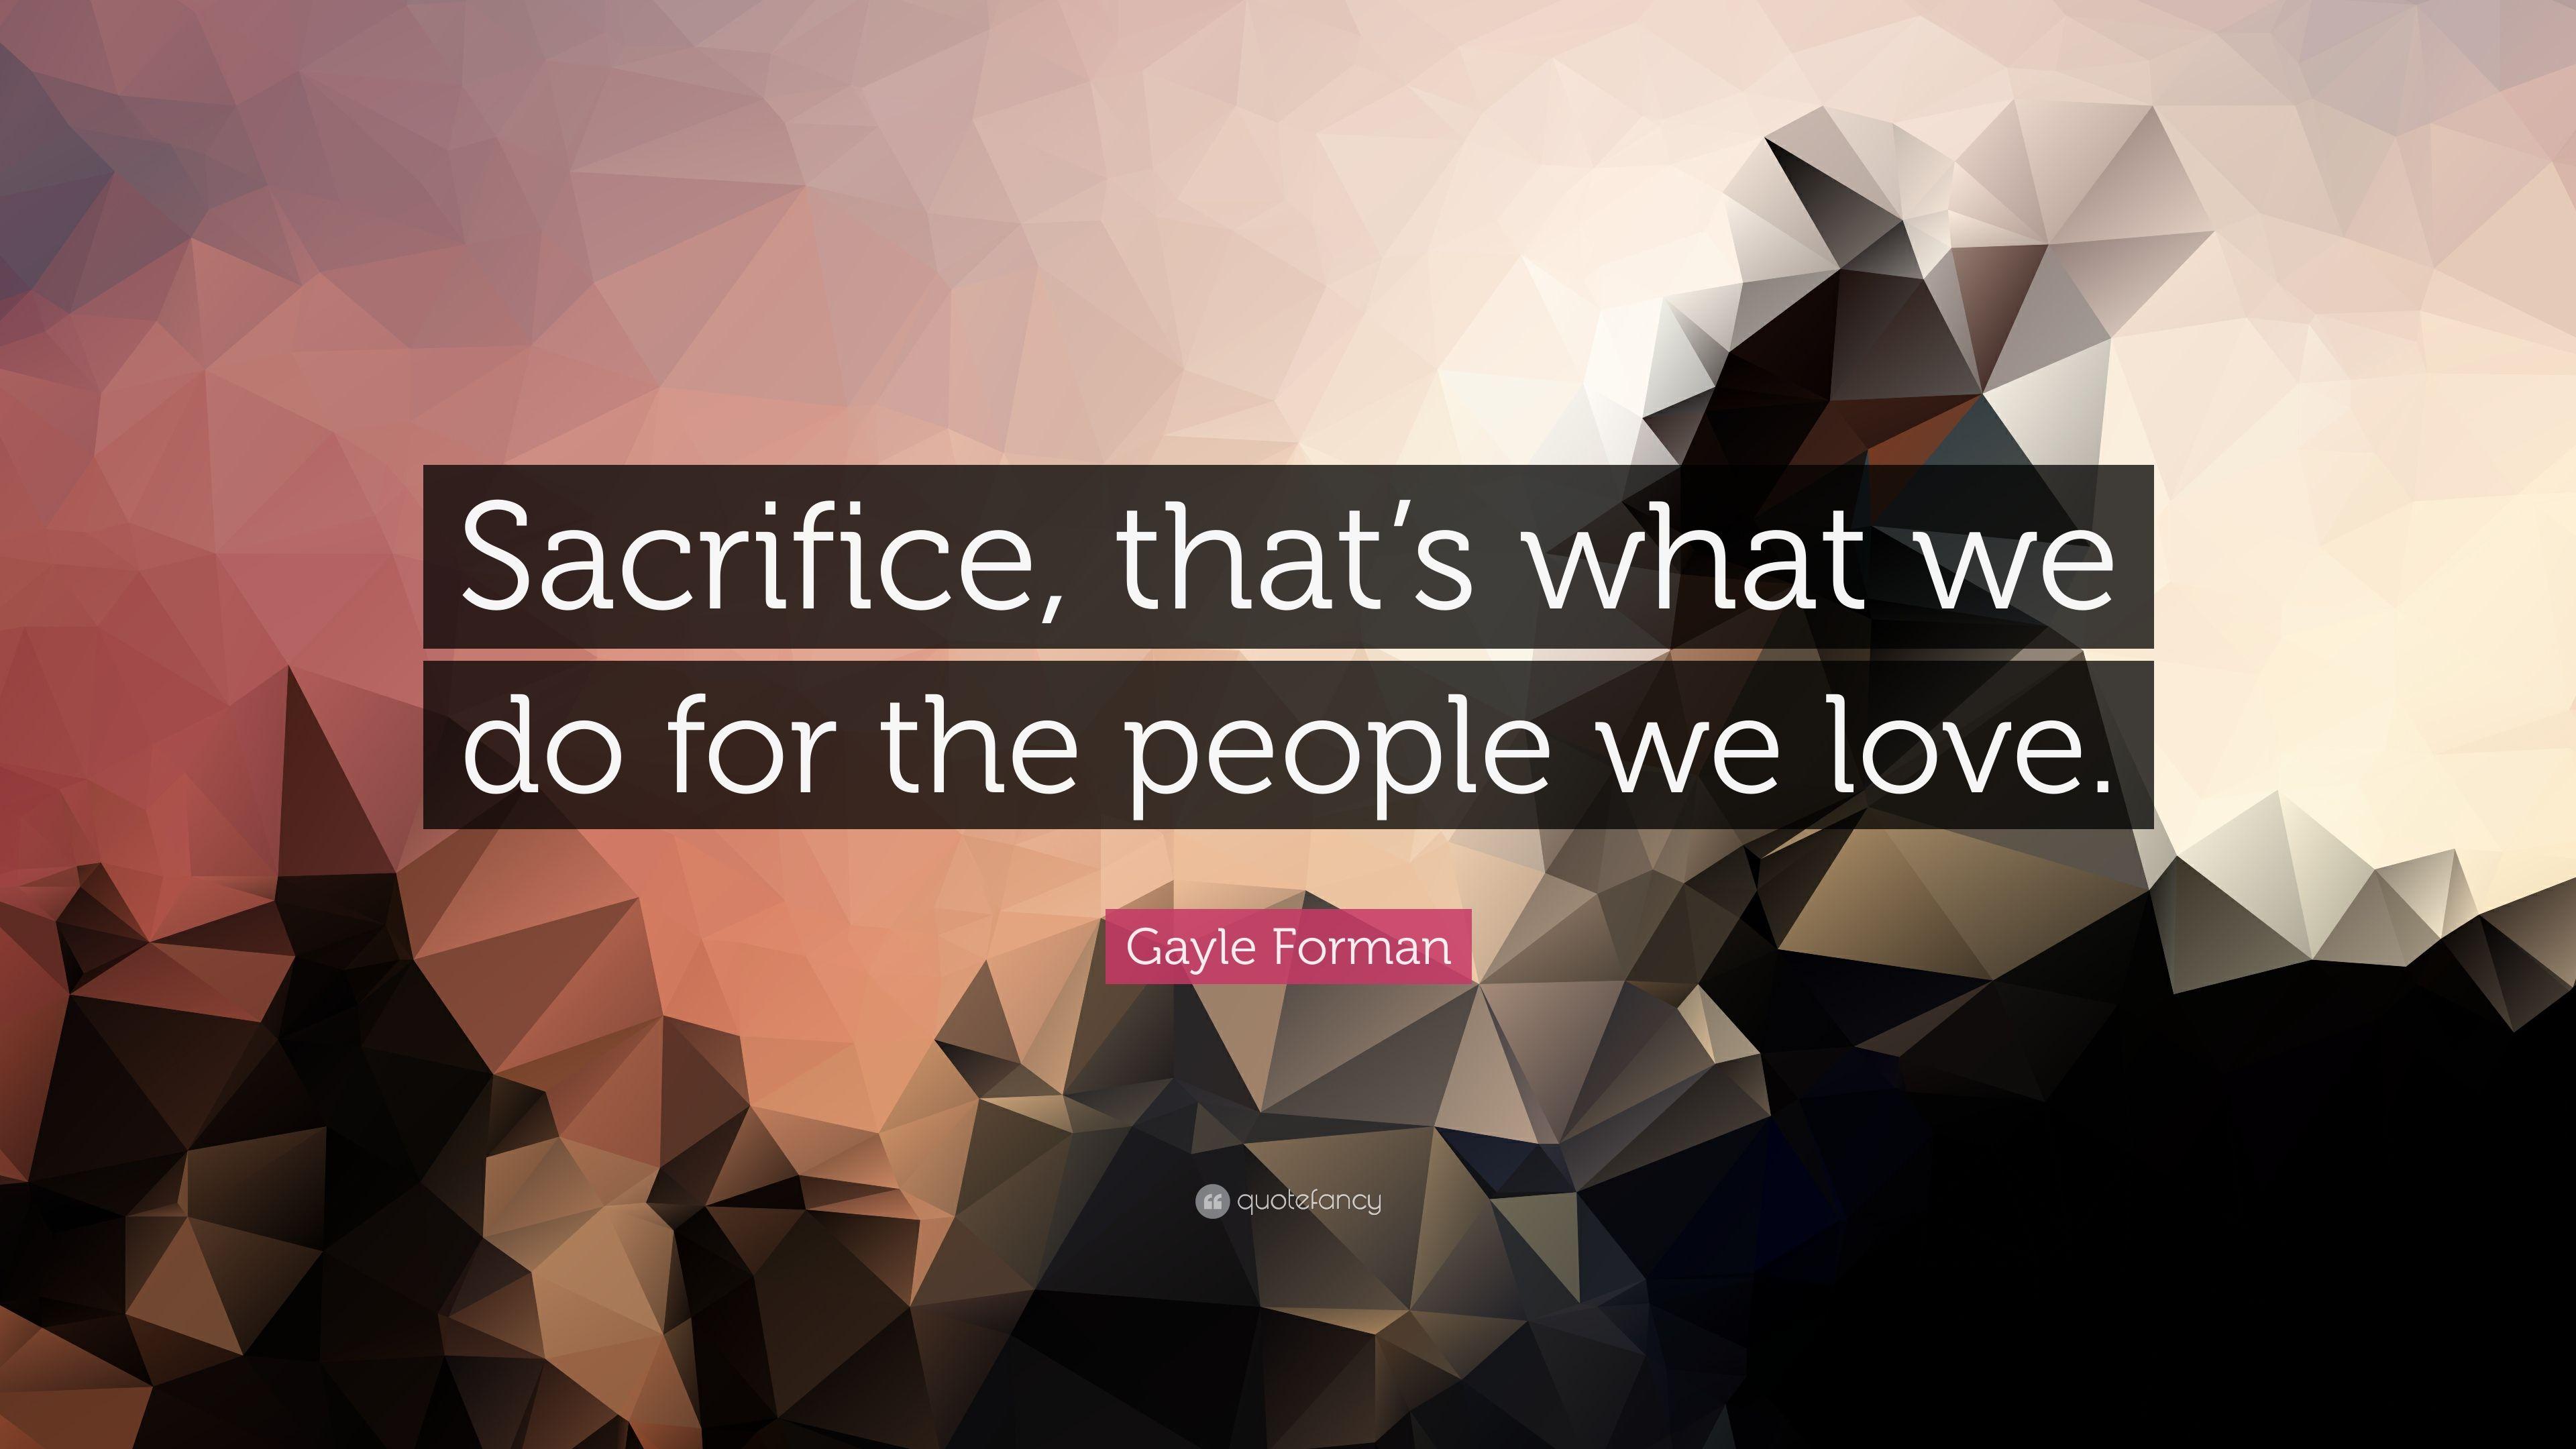 Gayle Forman Quote: “Sacrifice, that's what we do for the people we